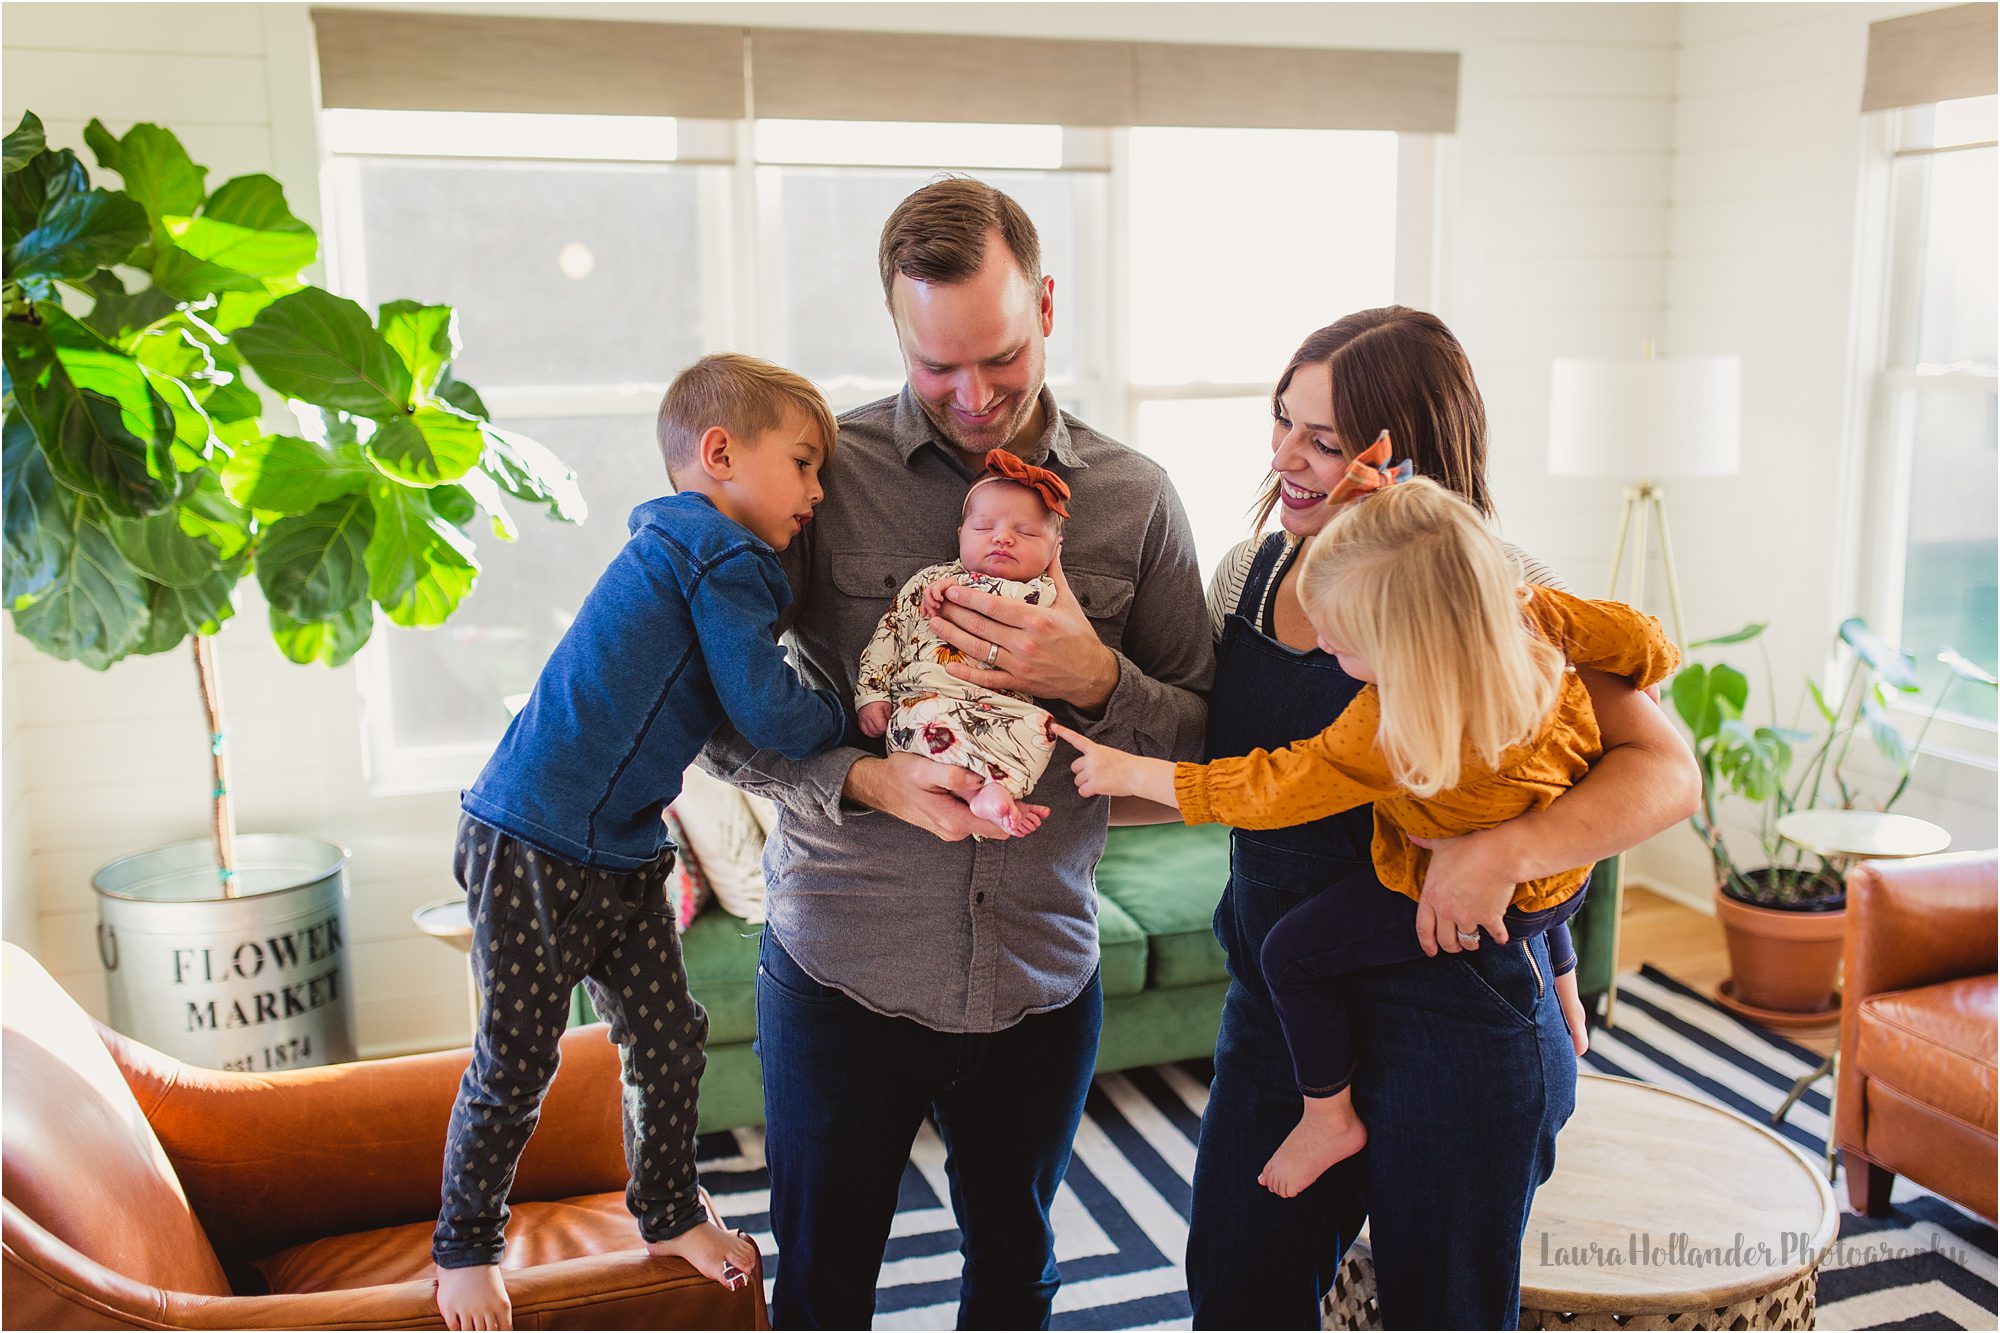 lifestyle newborn photography grand rapids, newborn photography with siblings, Laura Hollander Photography